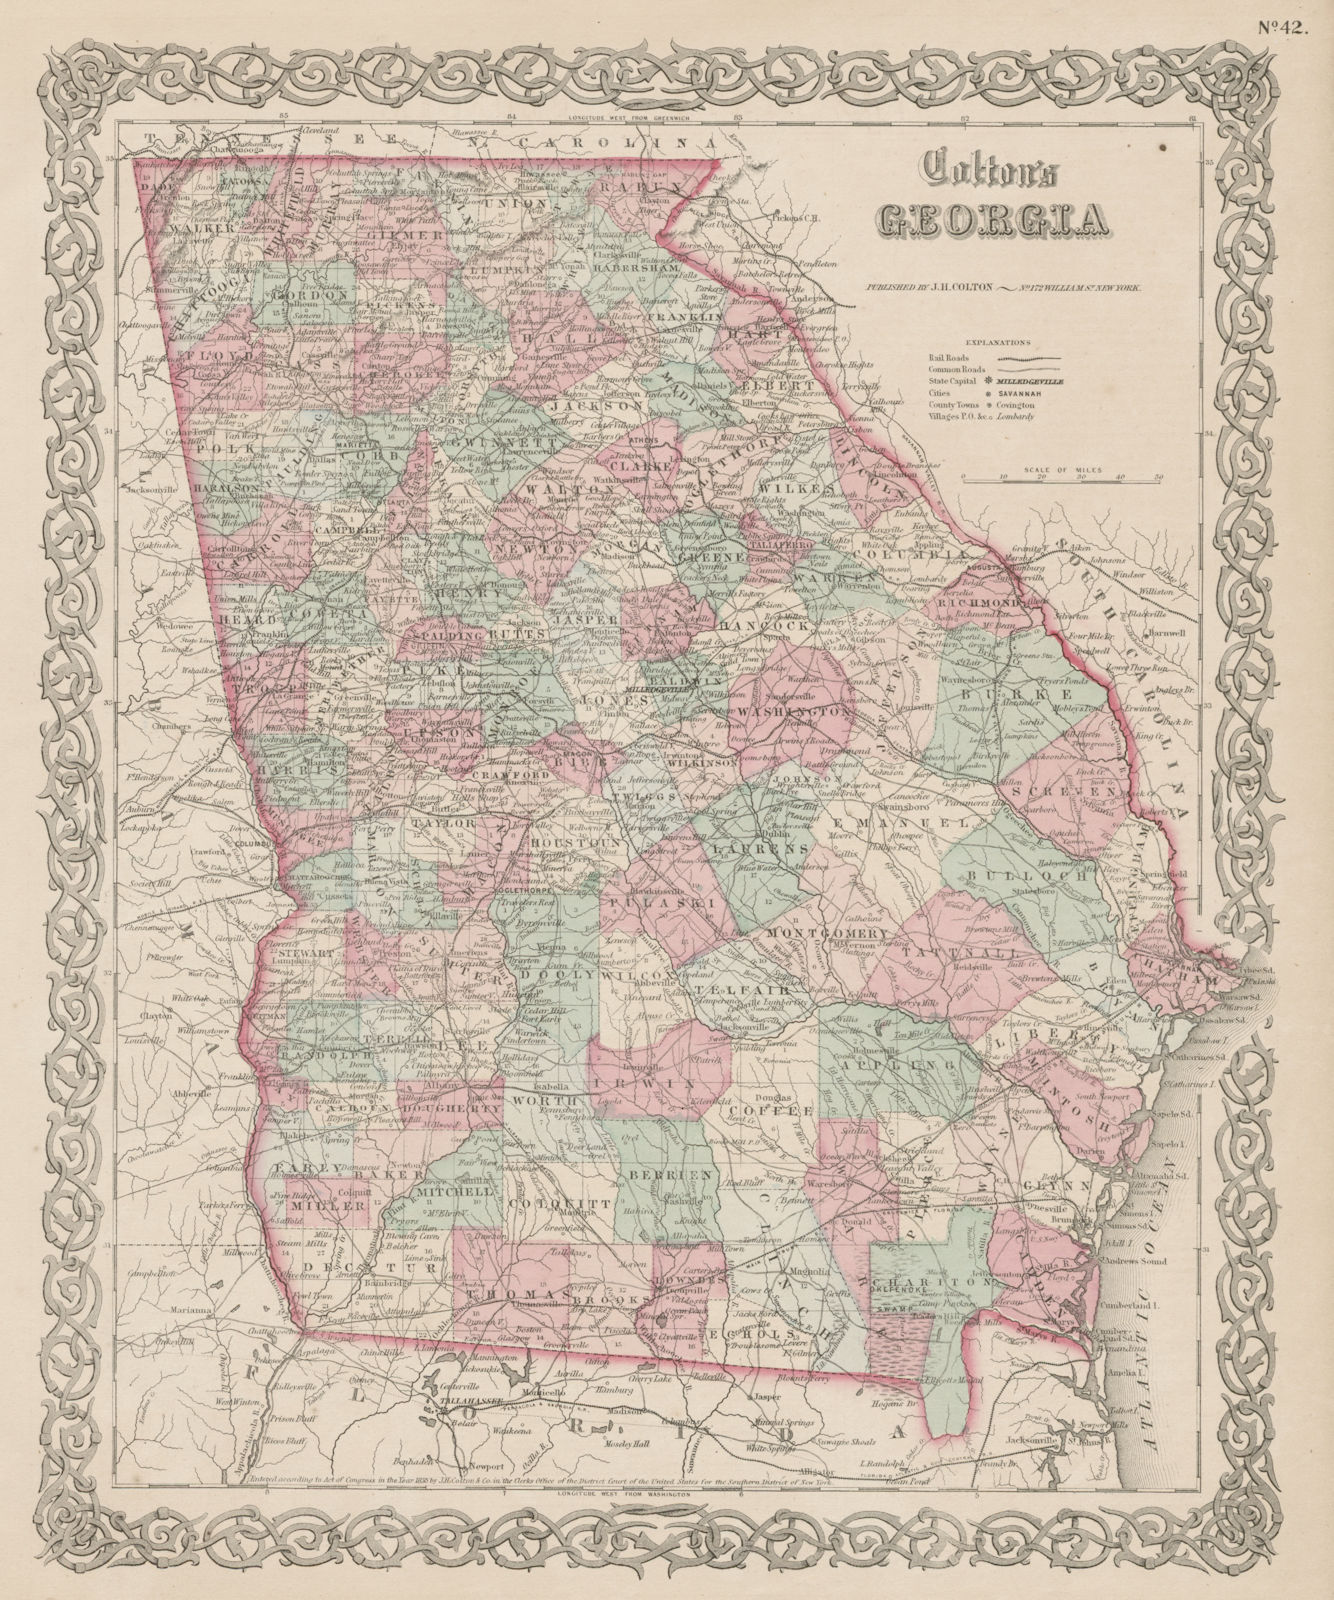 "Colton's Georgia". Decorative antique US state map 1863 old chart